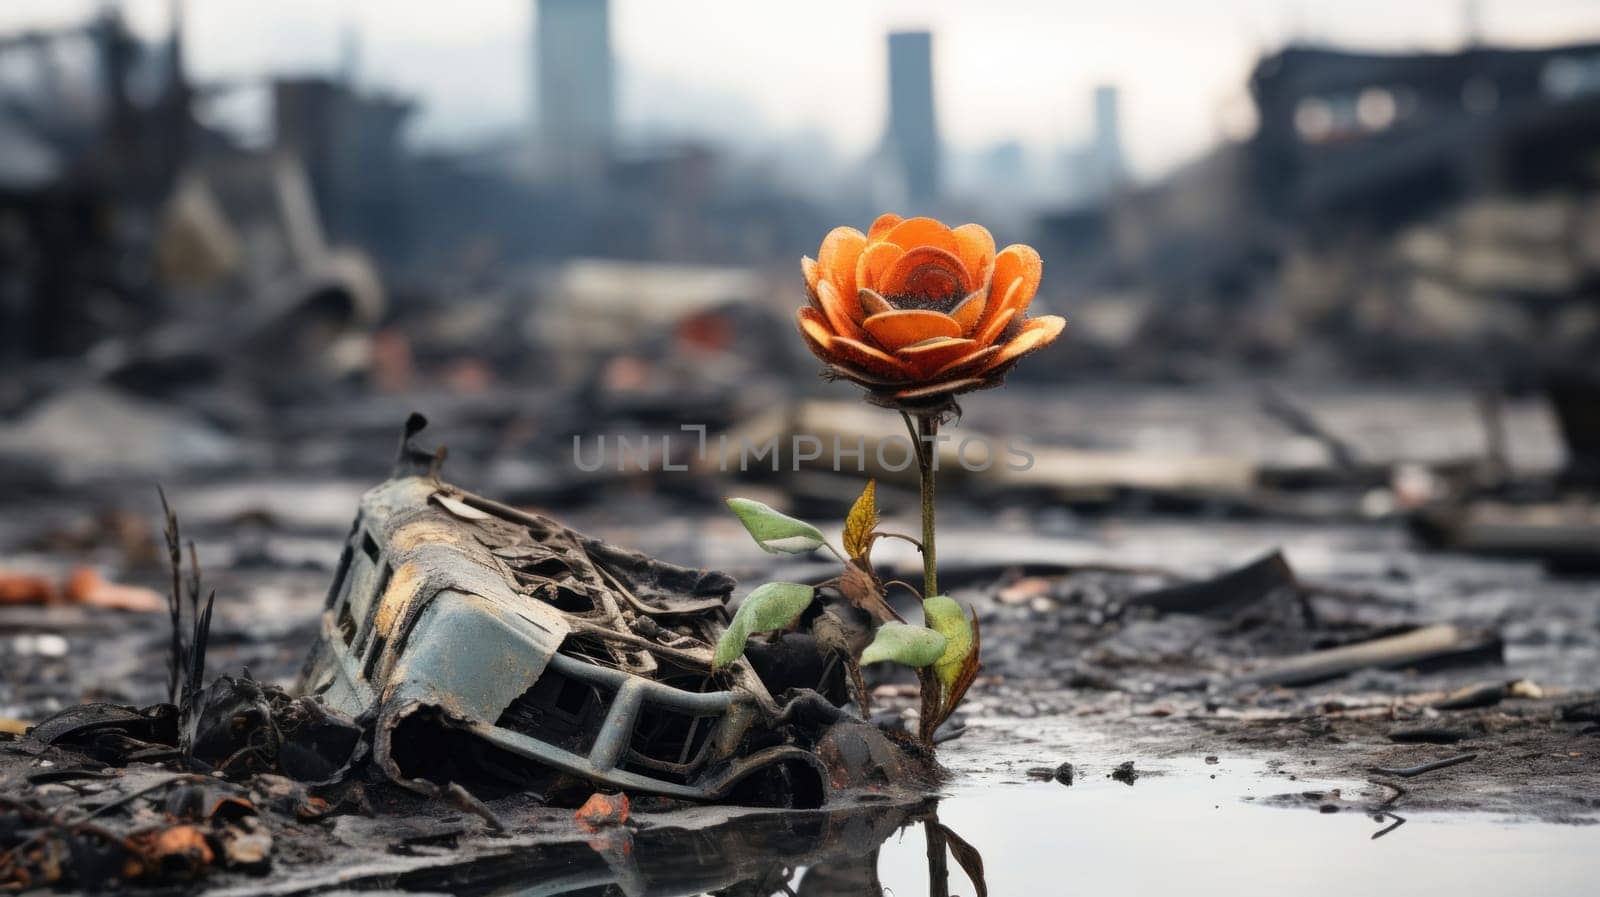 A flower is growing out of a car that has been destroyed